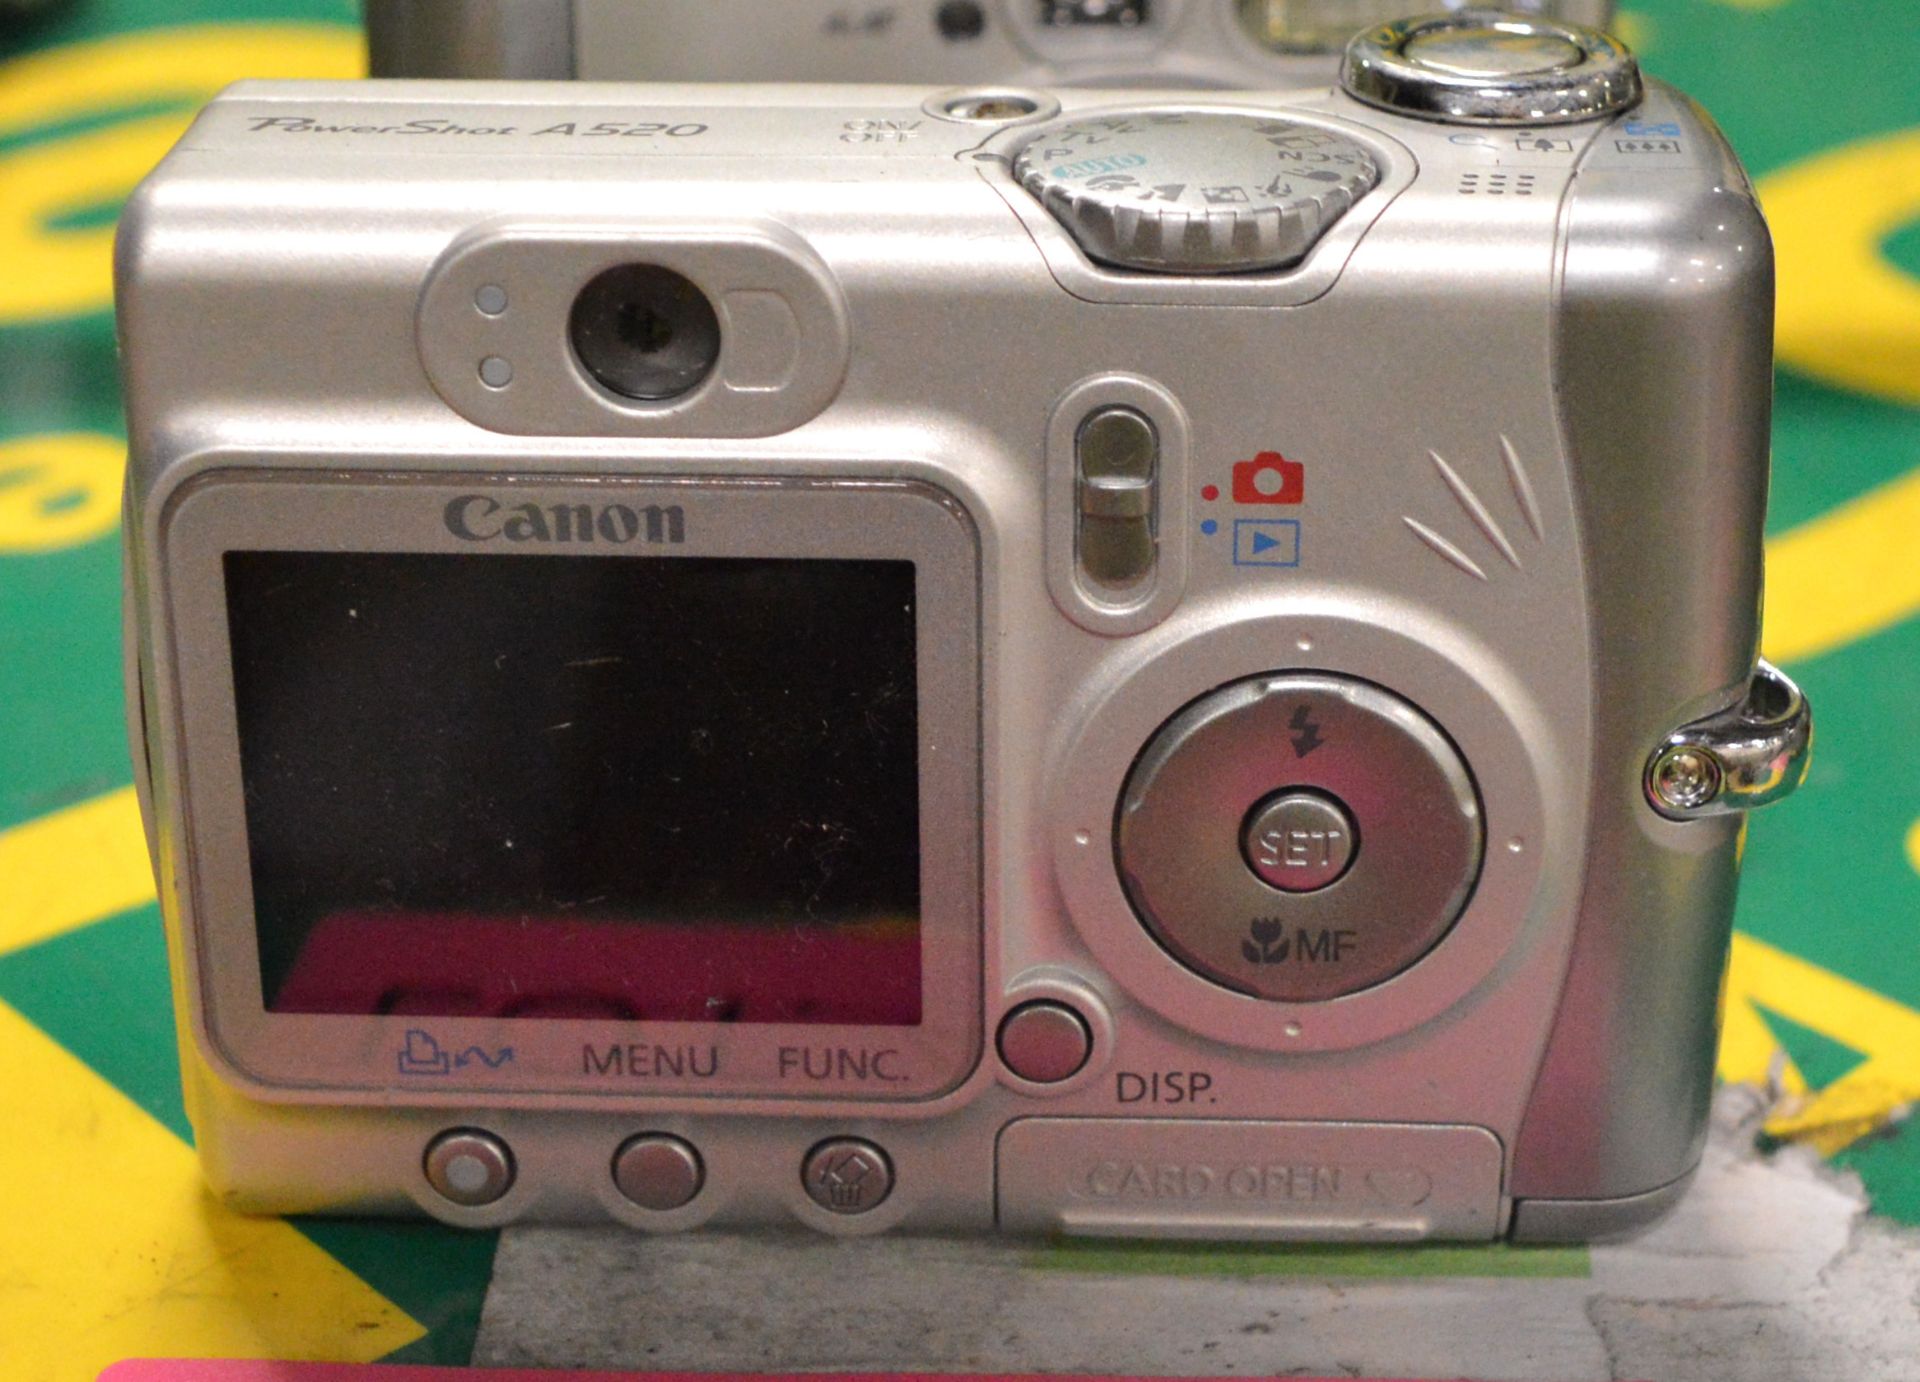 5x Canon PowerShot A520 Digital Cameras - Not Tested. - Image 2 of 2